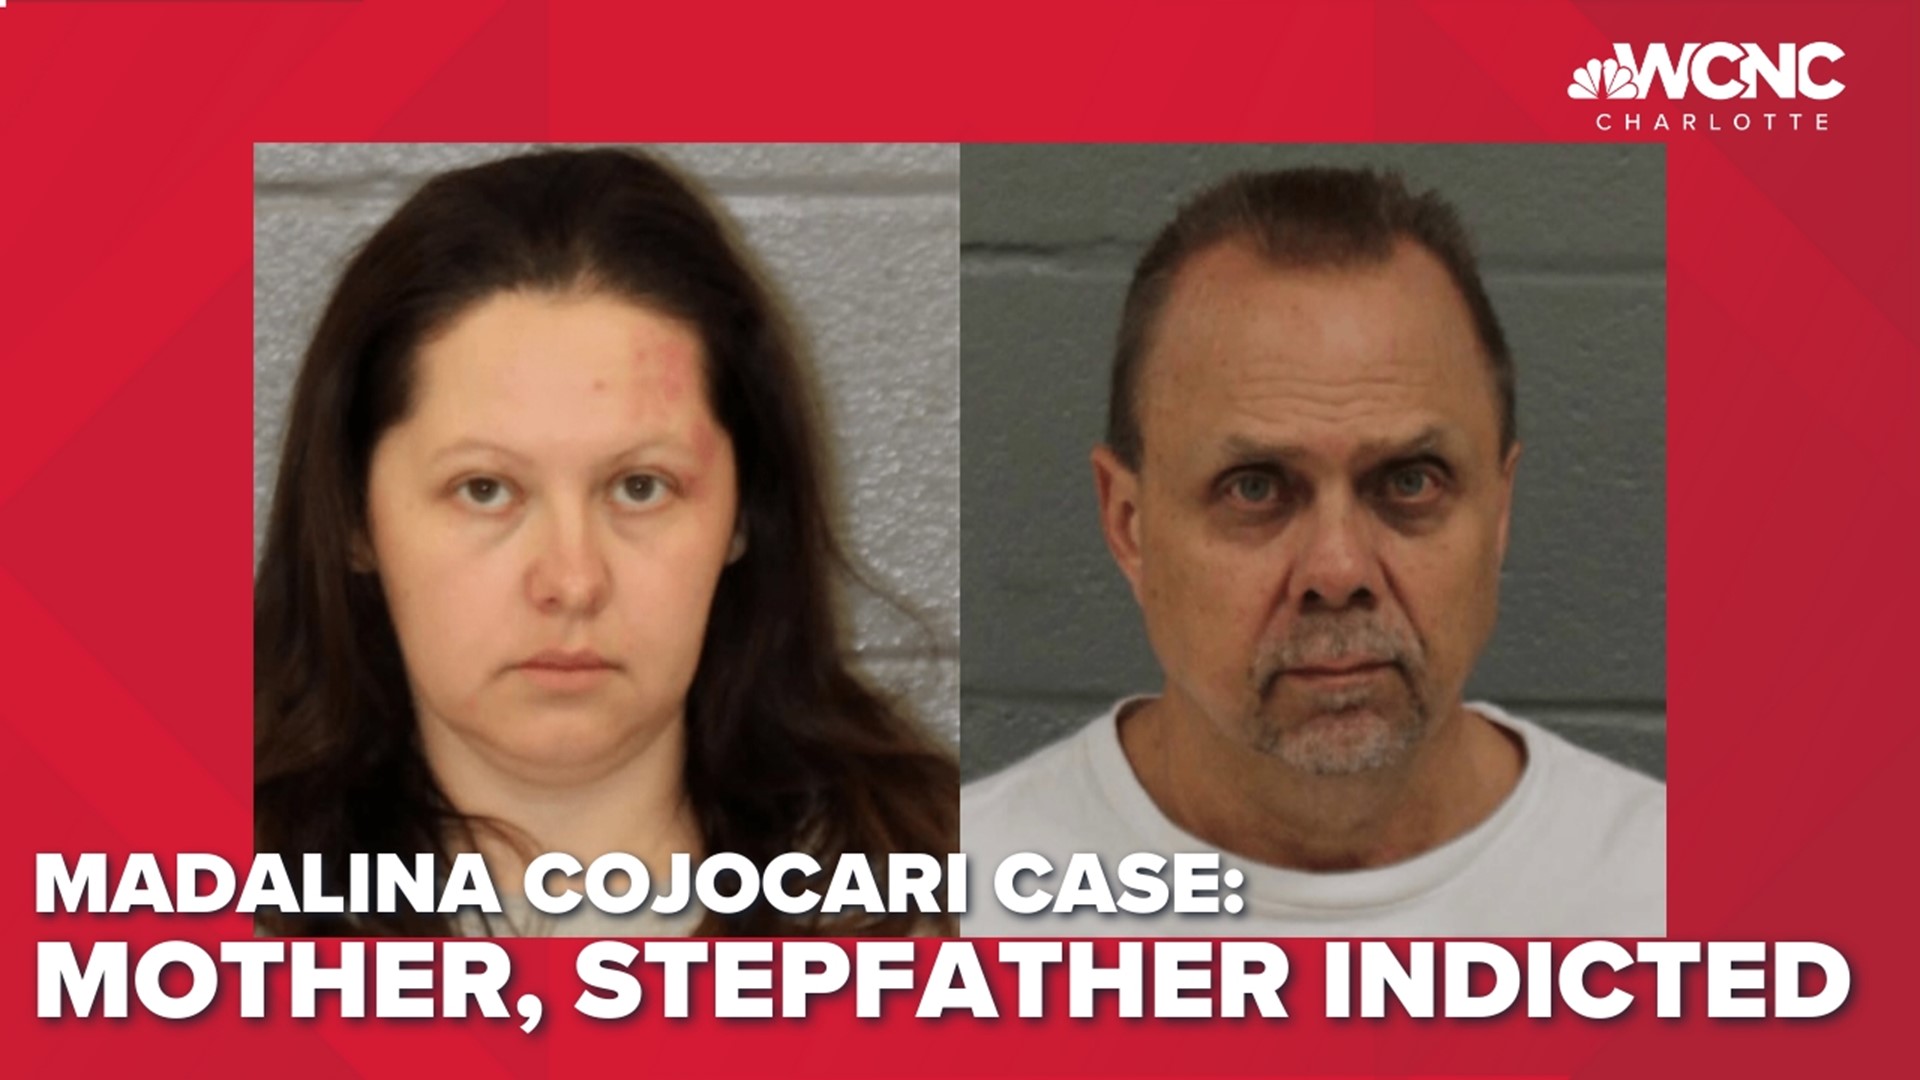 They are accused of failing to report the 11-year-old girl missing to law enforcement.